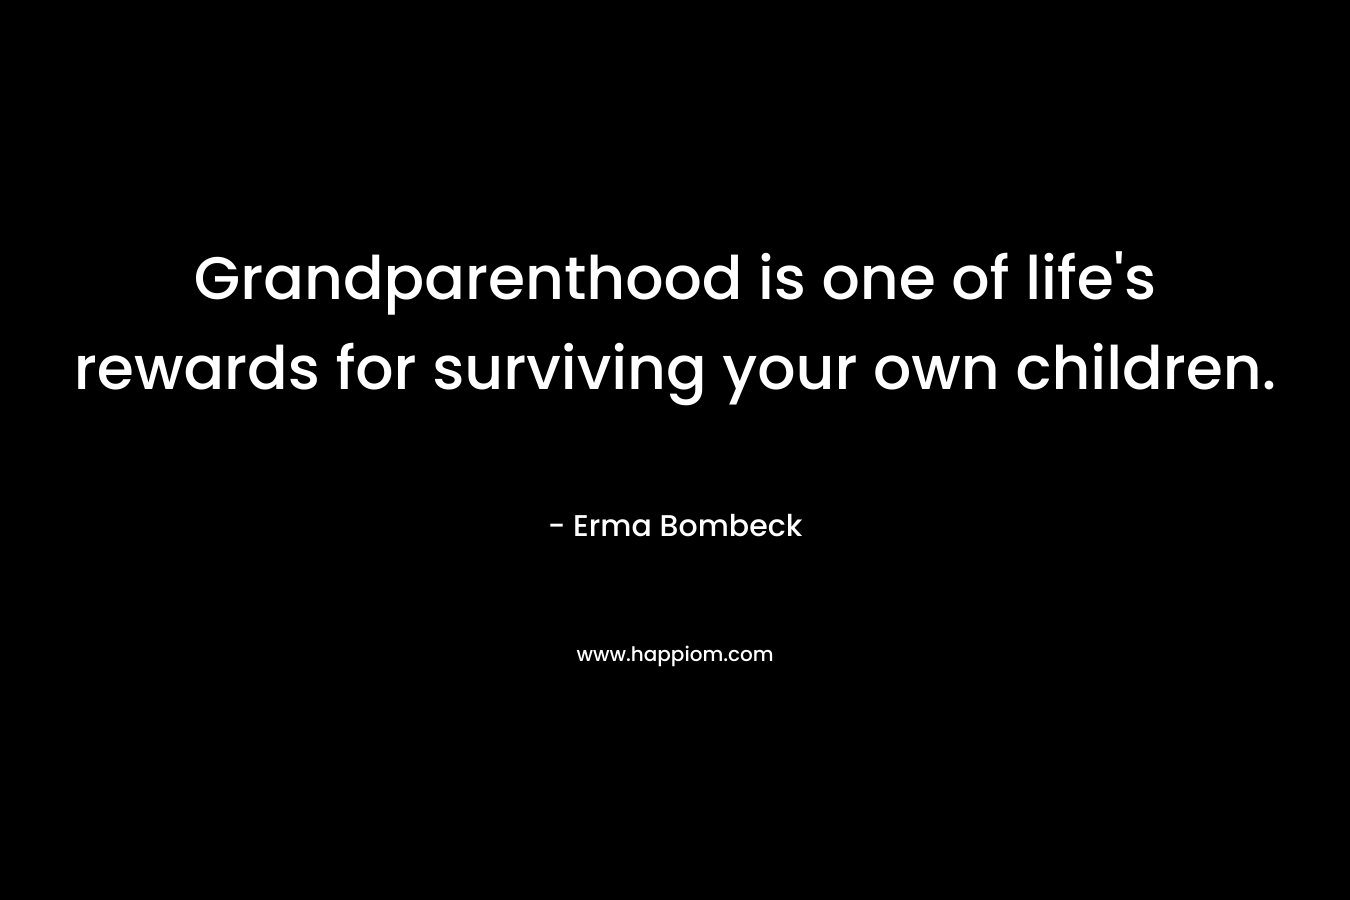 Grandparenthood is one of life's rewards for surviving your own children.